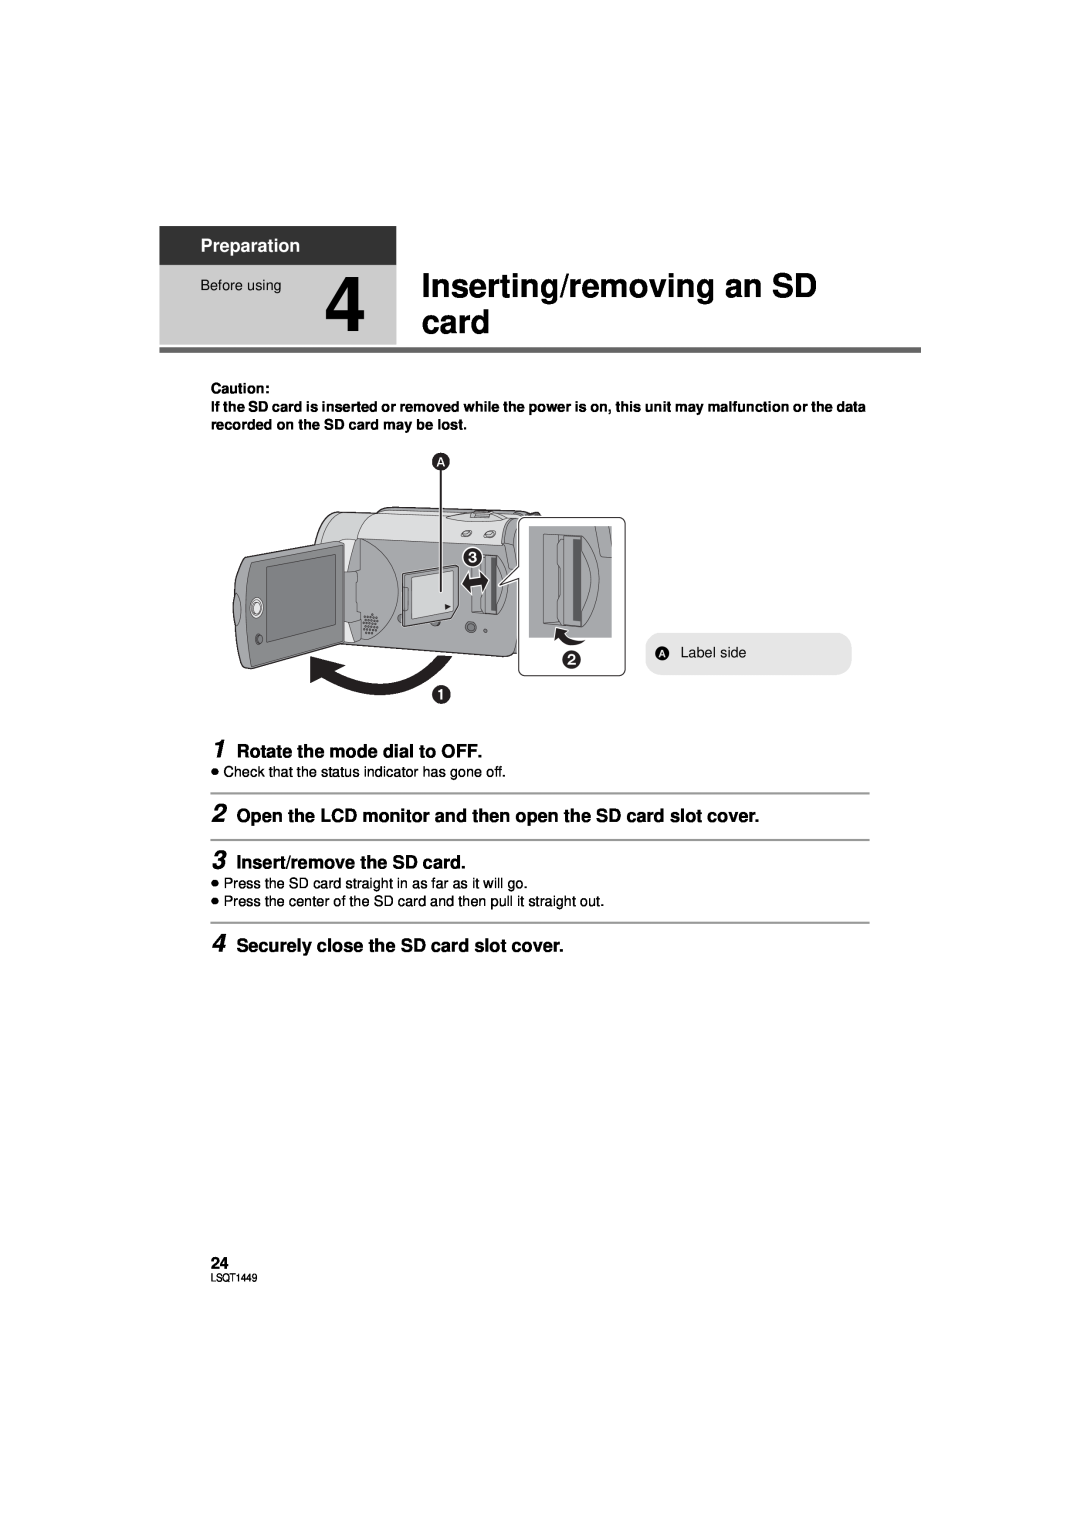 Panasonic SDR-H90P Inserting/removing an SD, Rotate the mode dial to OFF, Insert/remove the SD card, Preparation 